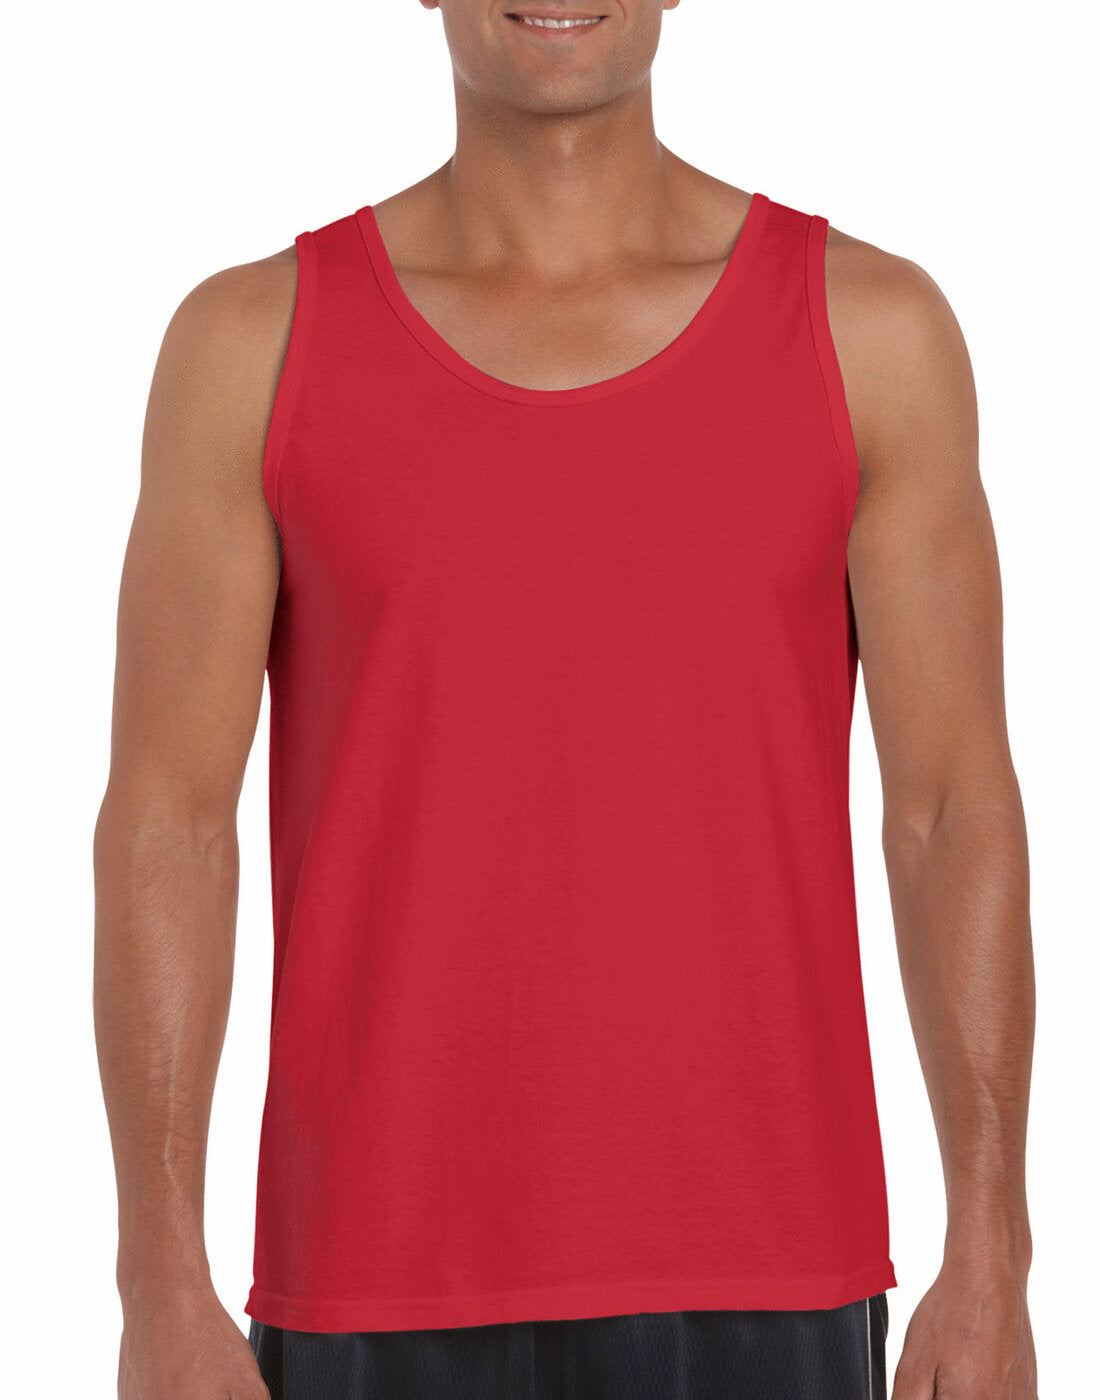 Gildan Softstyle Adult Tank Top - Red